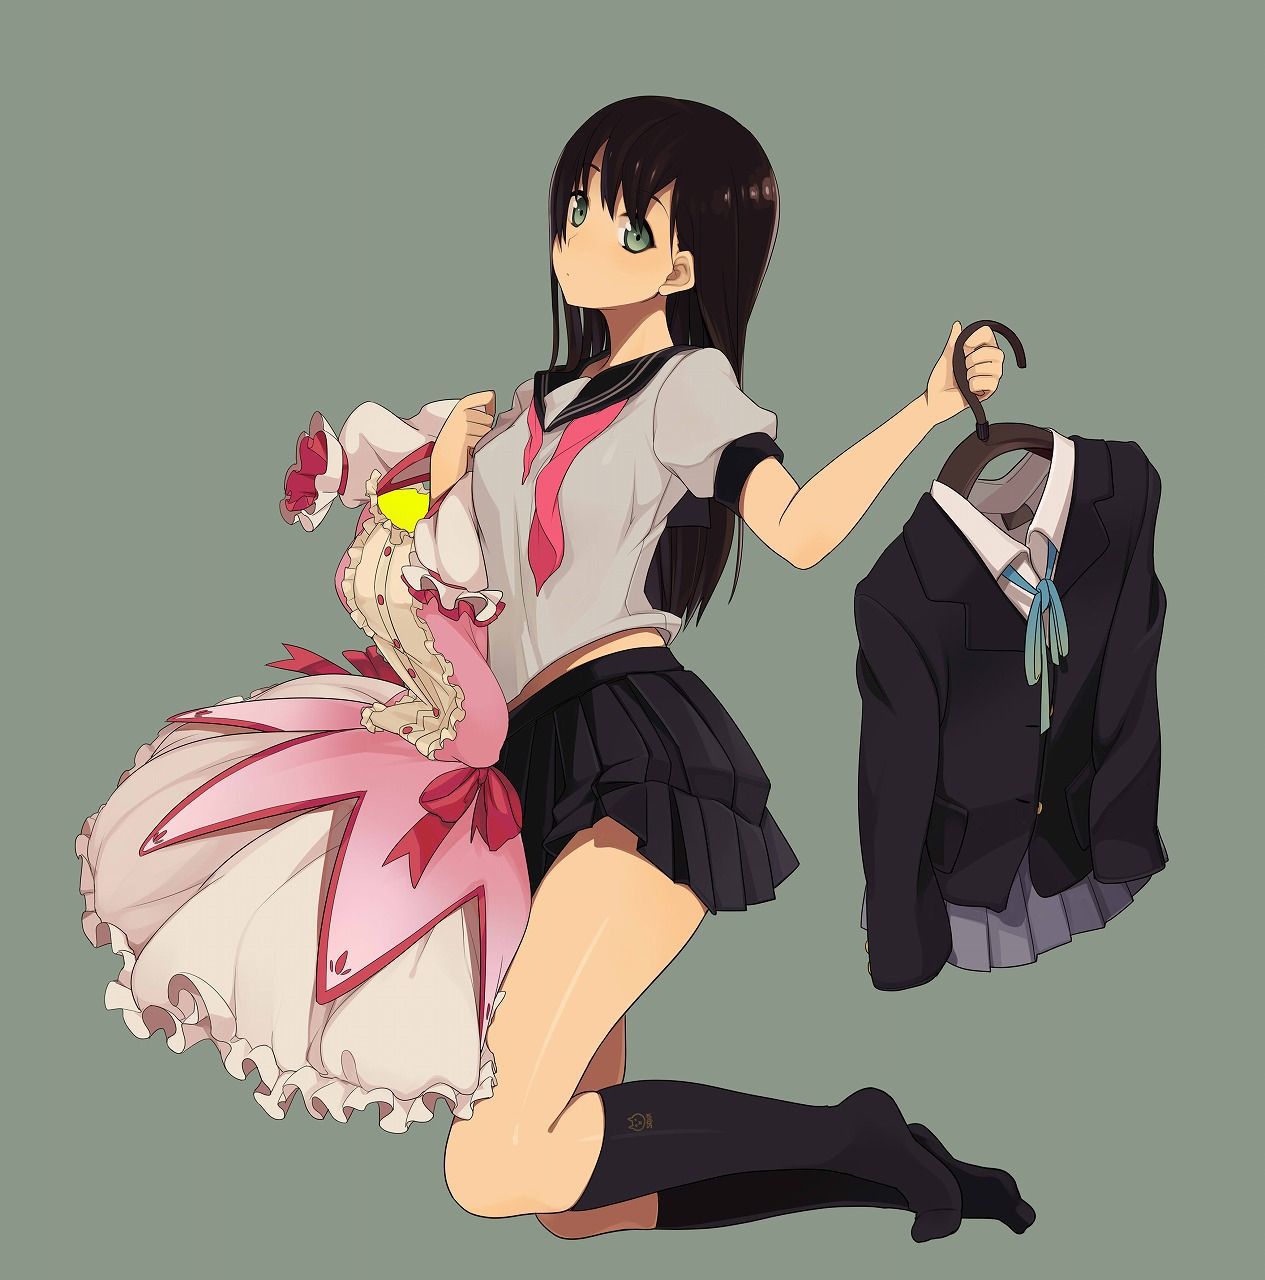 There is also an image of a beautiful girl uniform I want to try to socialize by all means 21